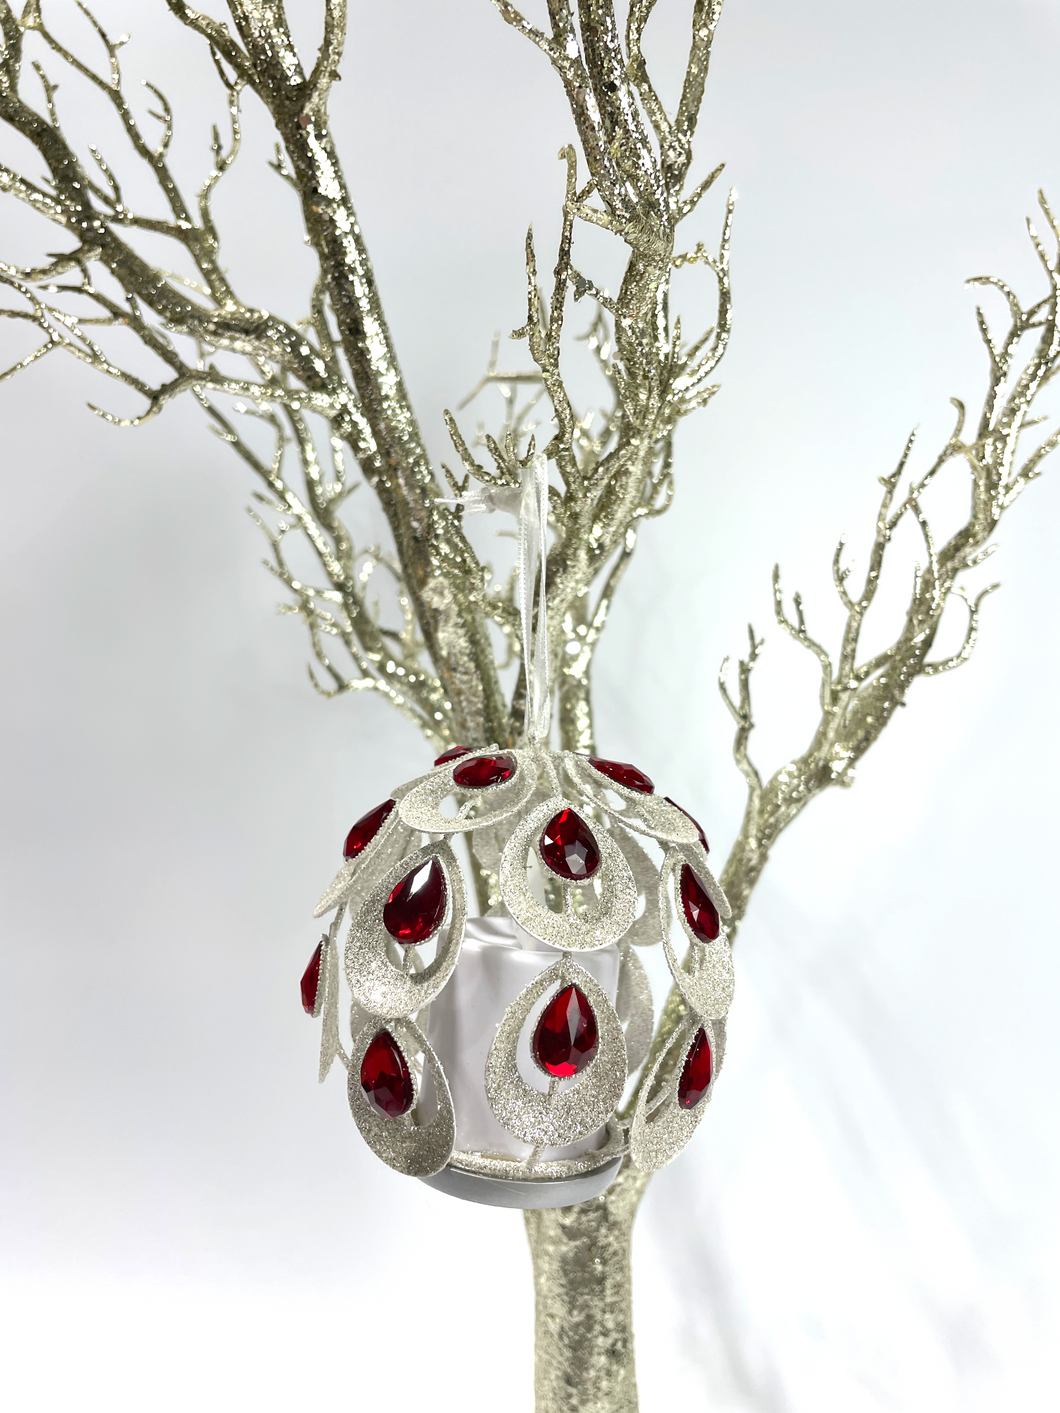 LED Ornament with Flickering Flame